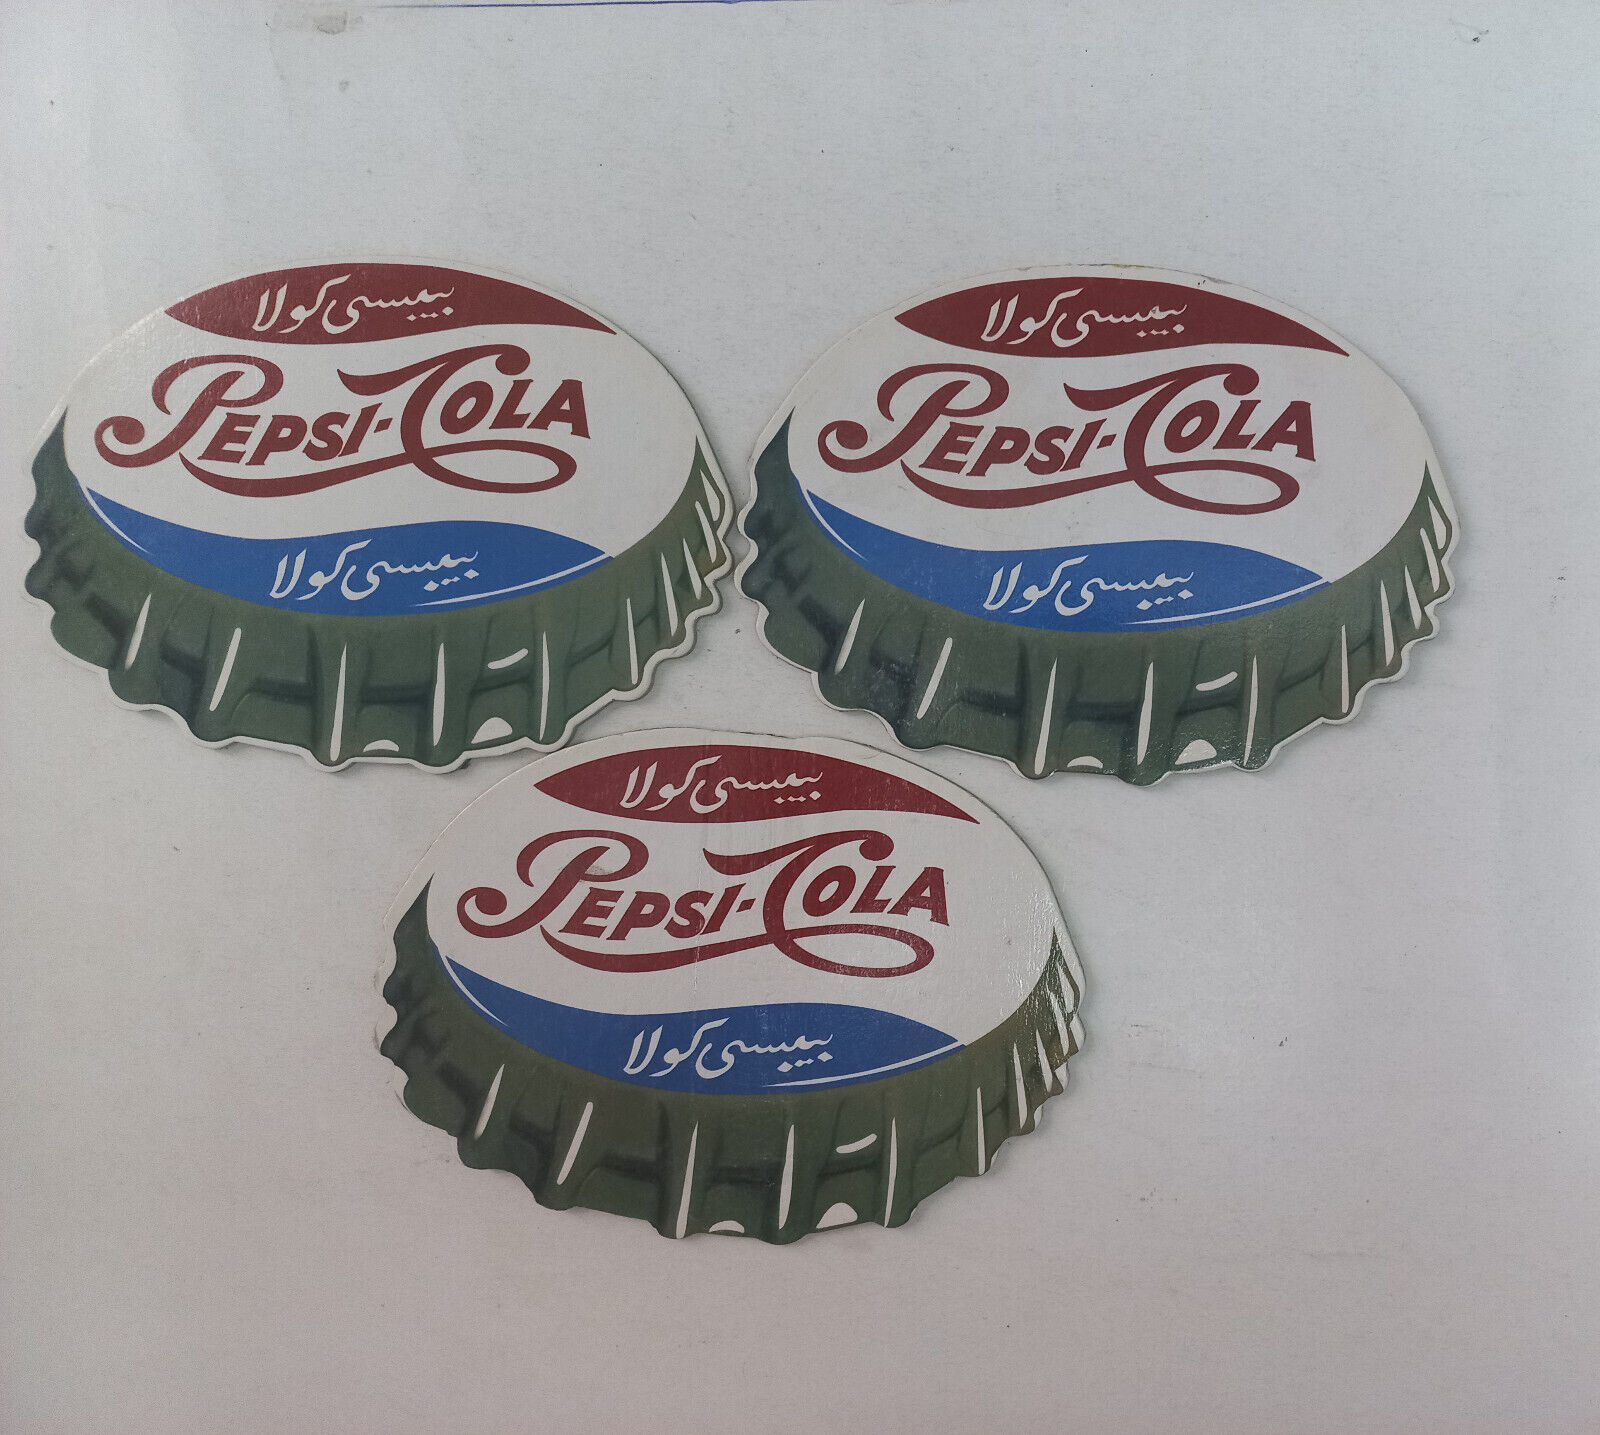 Primary image for EGYPT PEPSI COLA old Rare Kind of Moving advertising (Carton) lot of 3بيبسي كولا